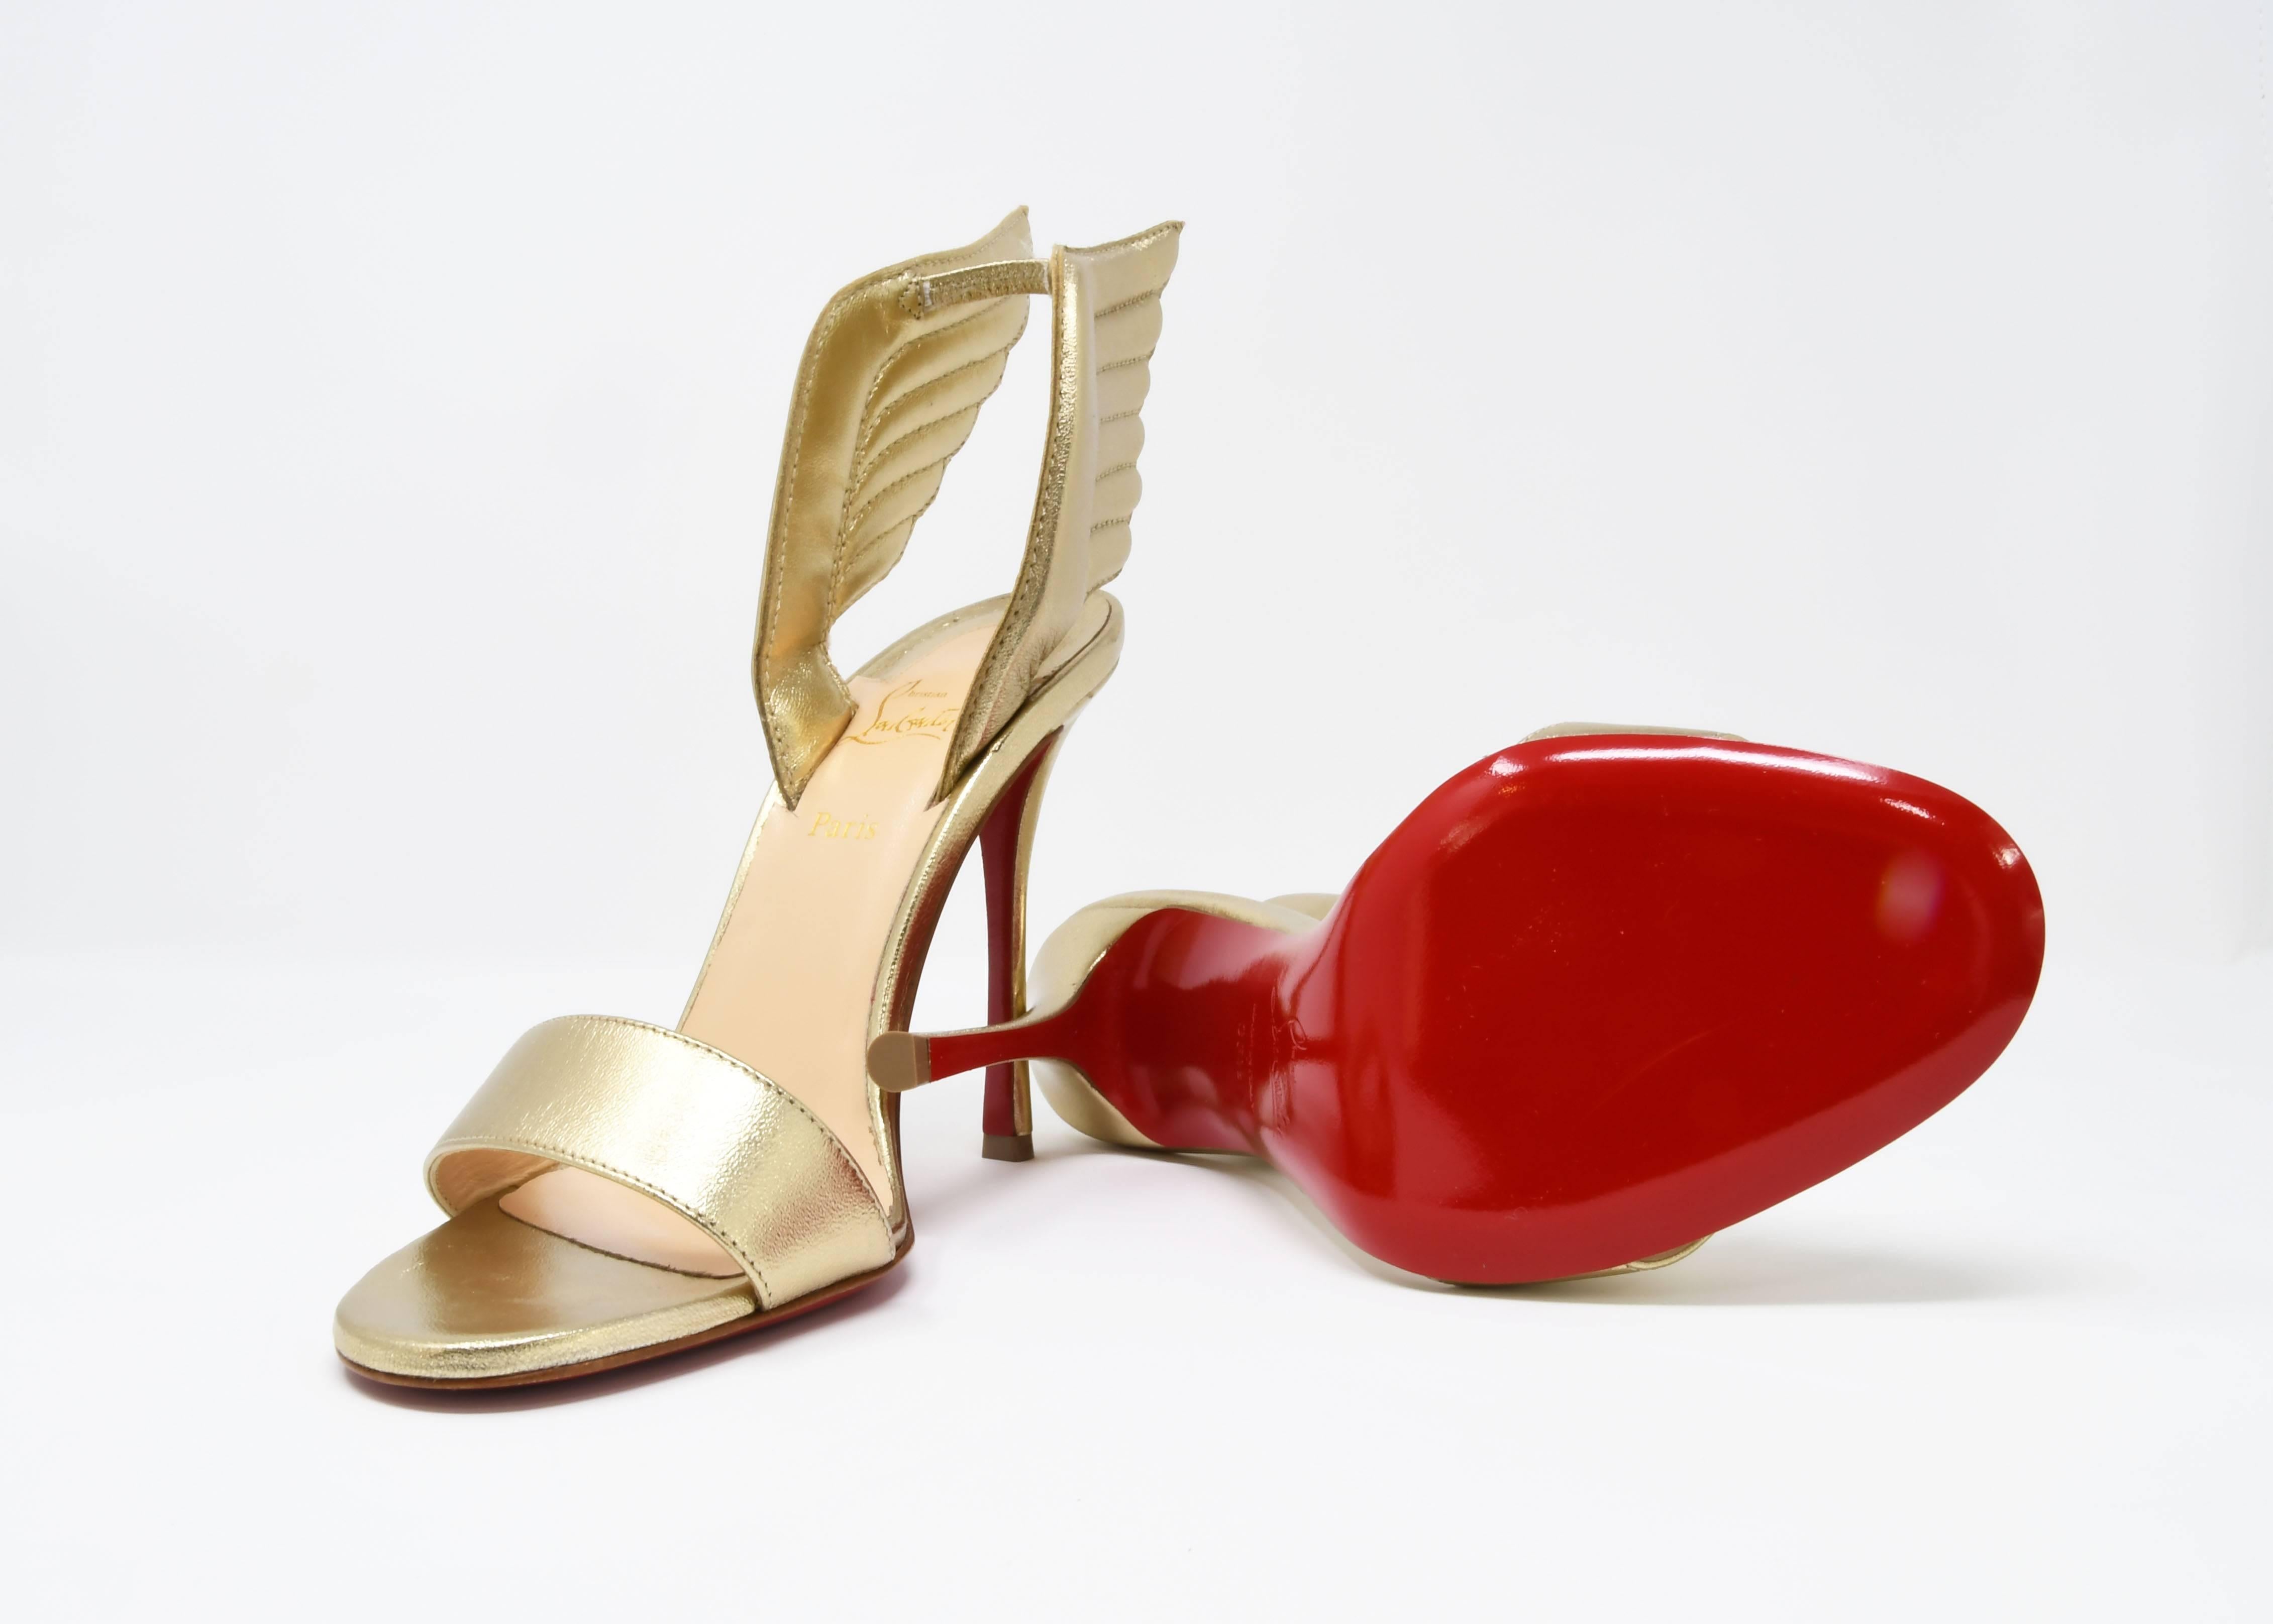 Christian Louboutin Nappa Laminata Samotresse 100 Wings Sandal heels in light metallic gold.  The sandals feature extraordinary wings with a chic peep toe with 4.5 inch heels and red lacquered soles.  Perfect for special occasions.  Dust bags and